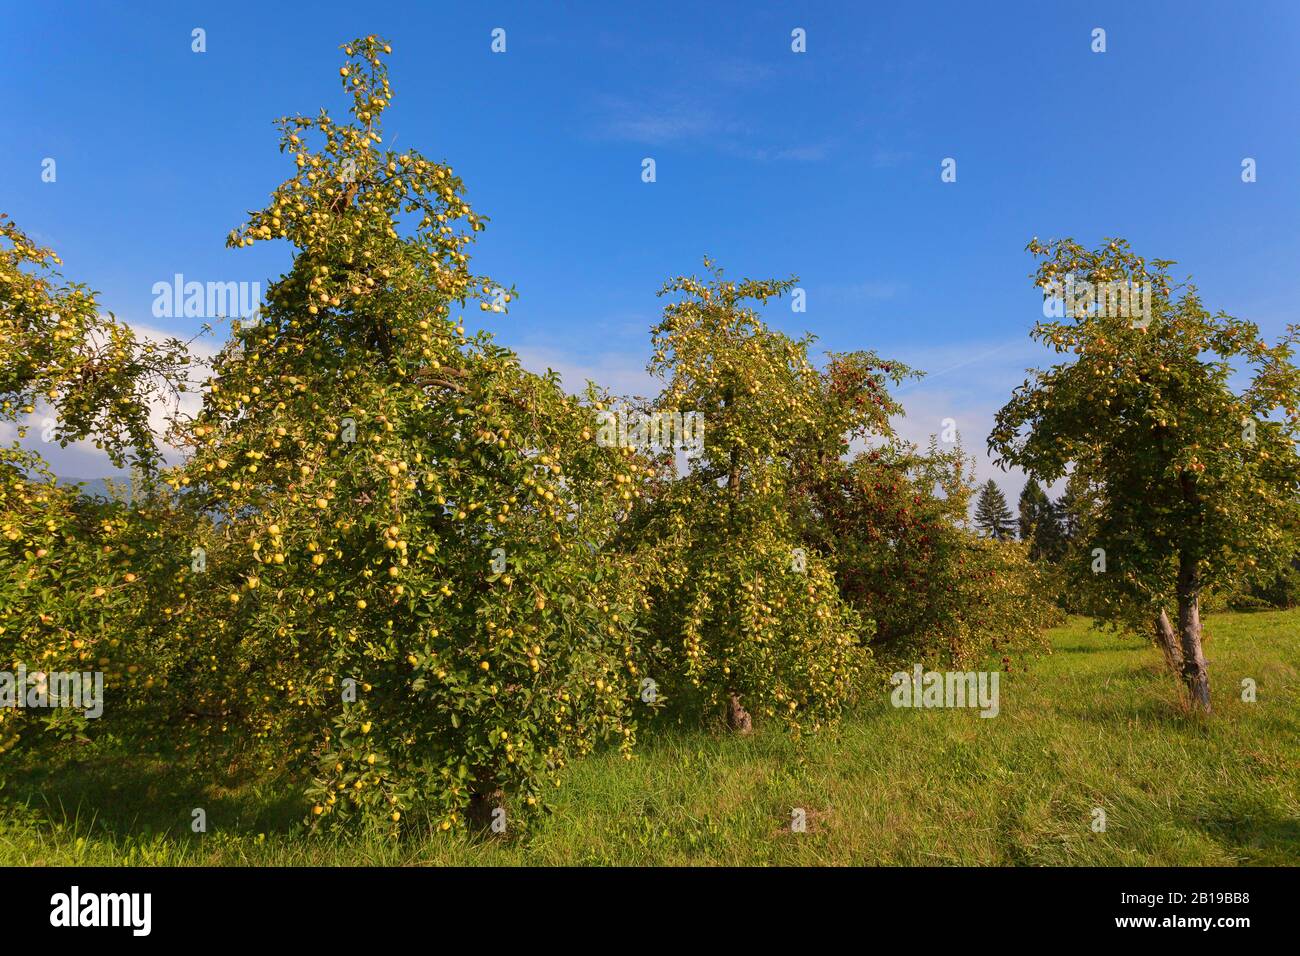 apple tree (Malus domestica), ready for harvesting apples at apple trees, Italy, South Tyrol, Trentino Stock Photo